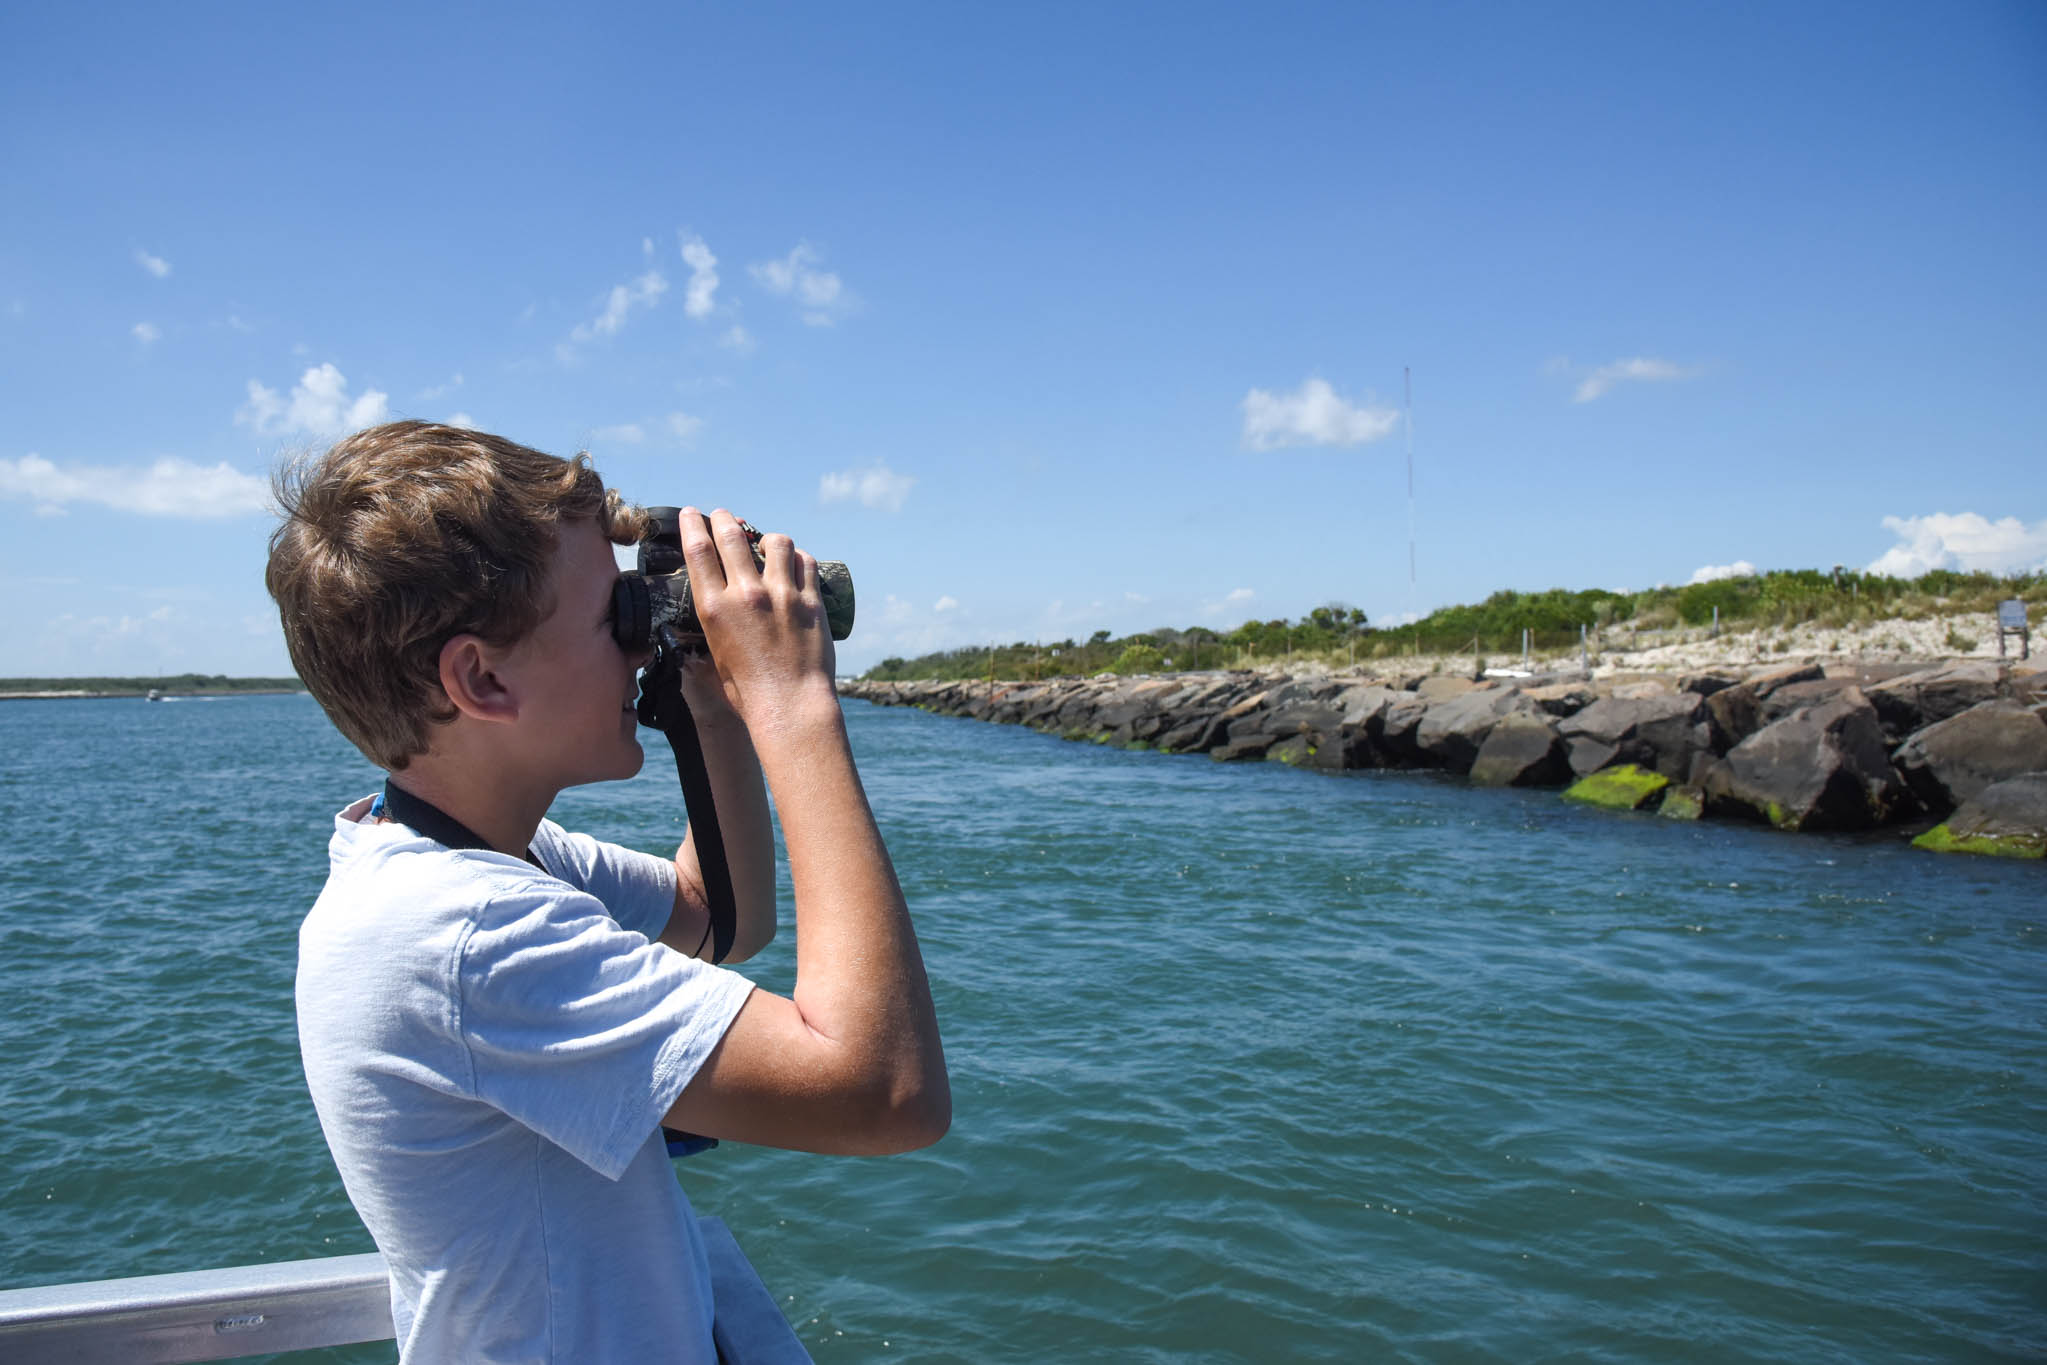 Liam looking for birds on the Salt Marsh Safari in the inlet.